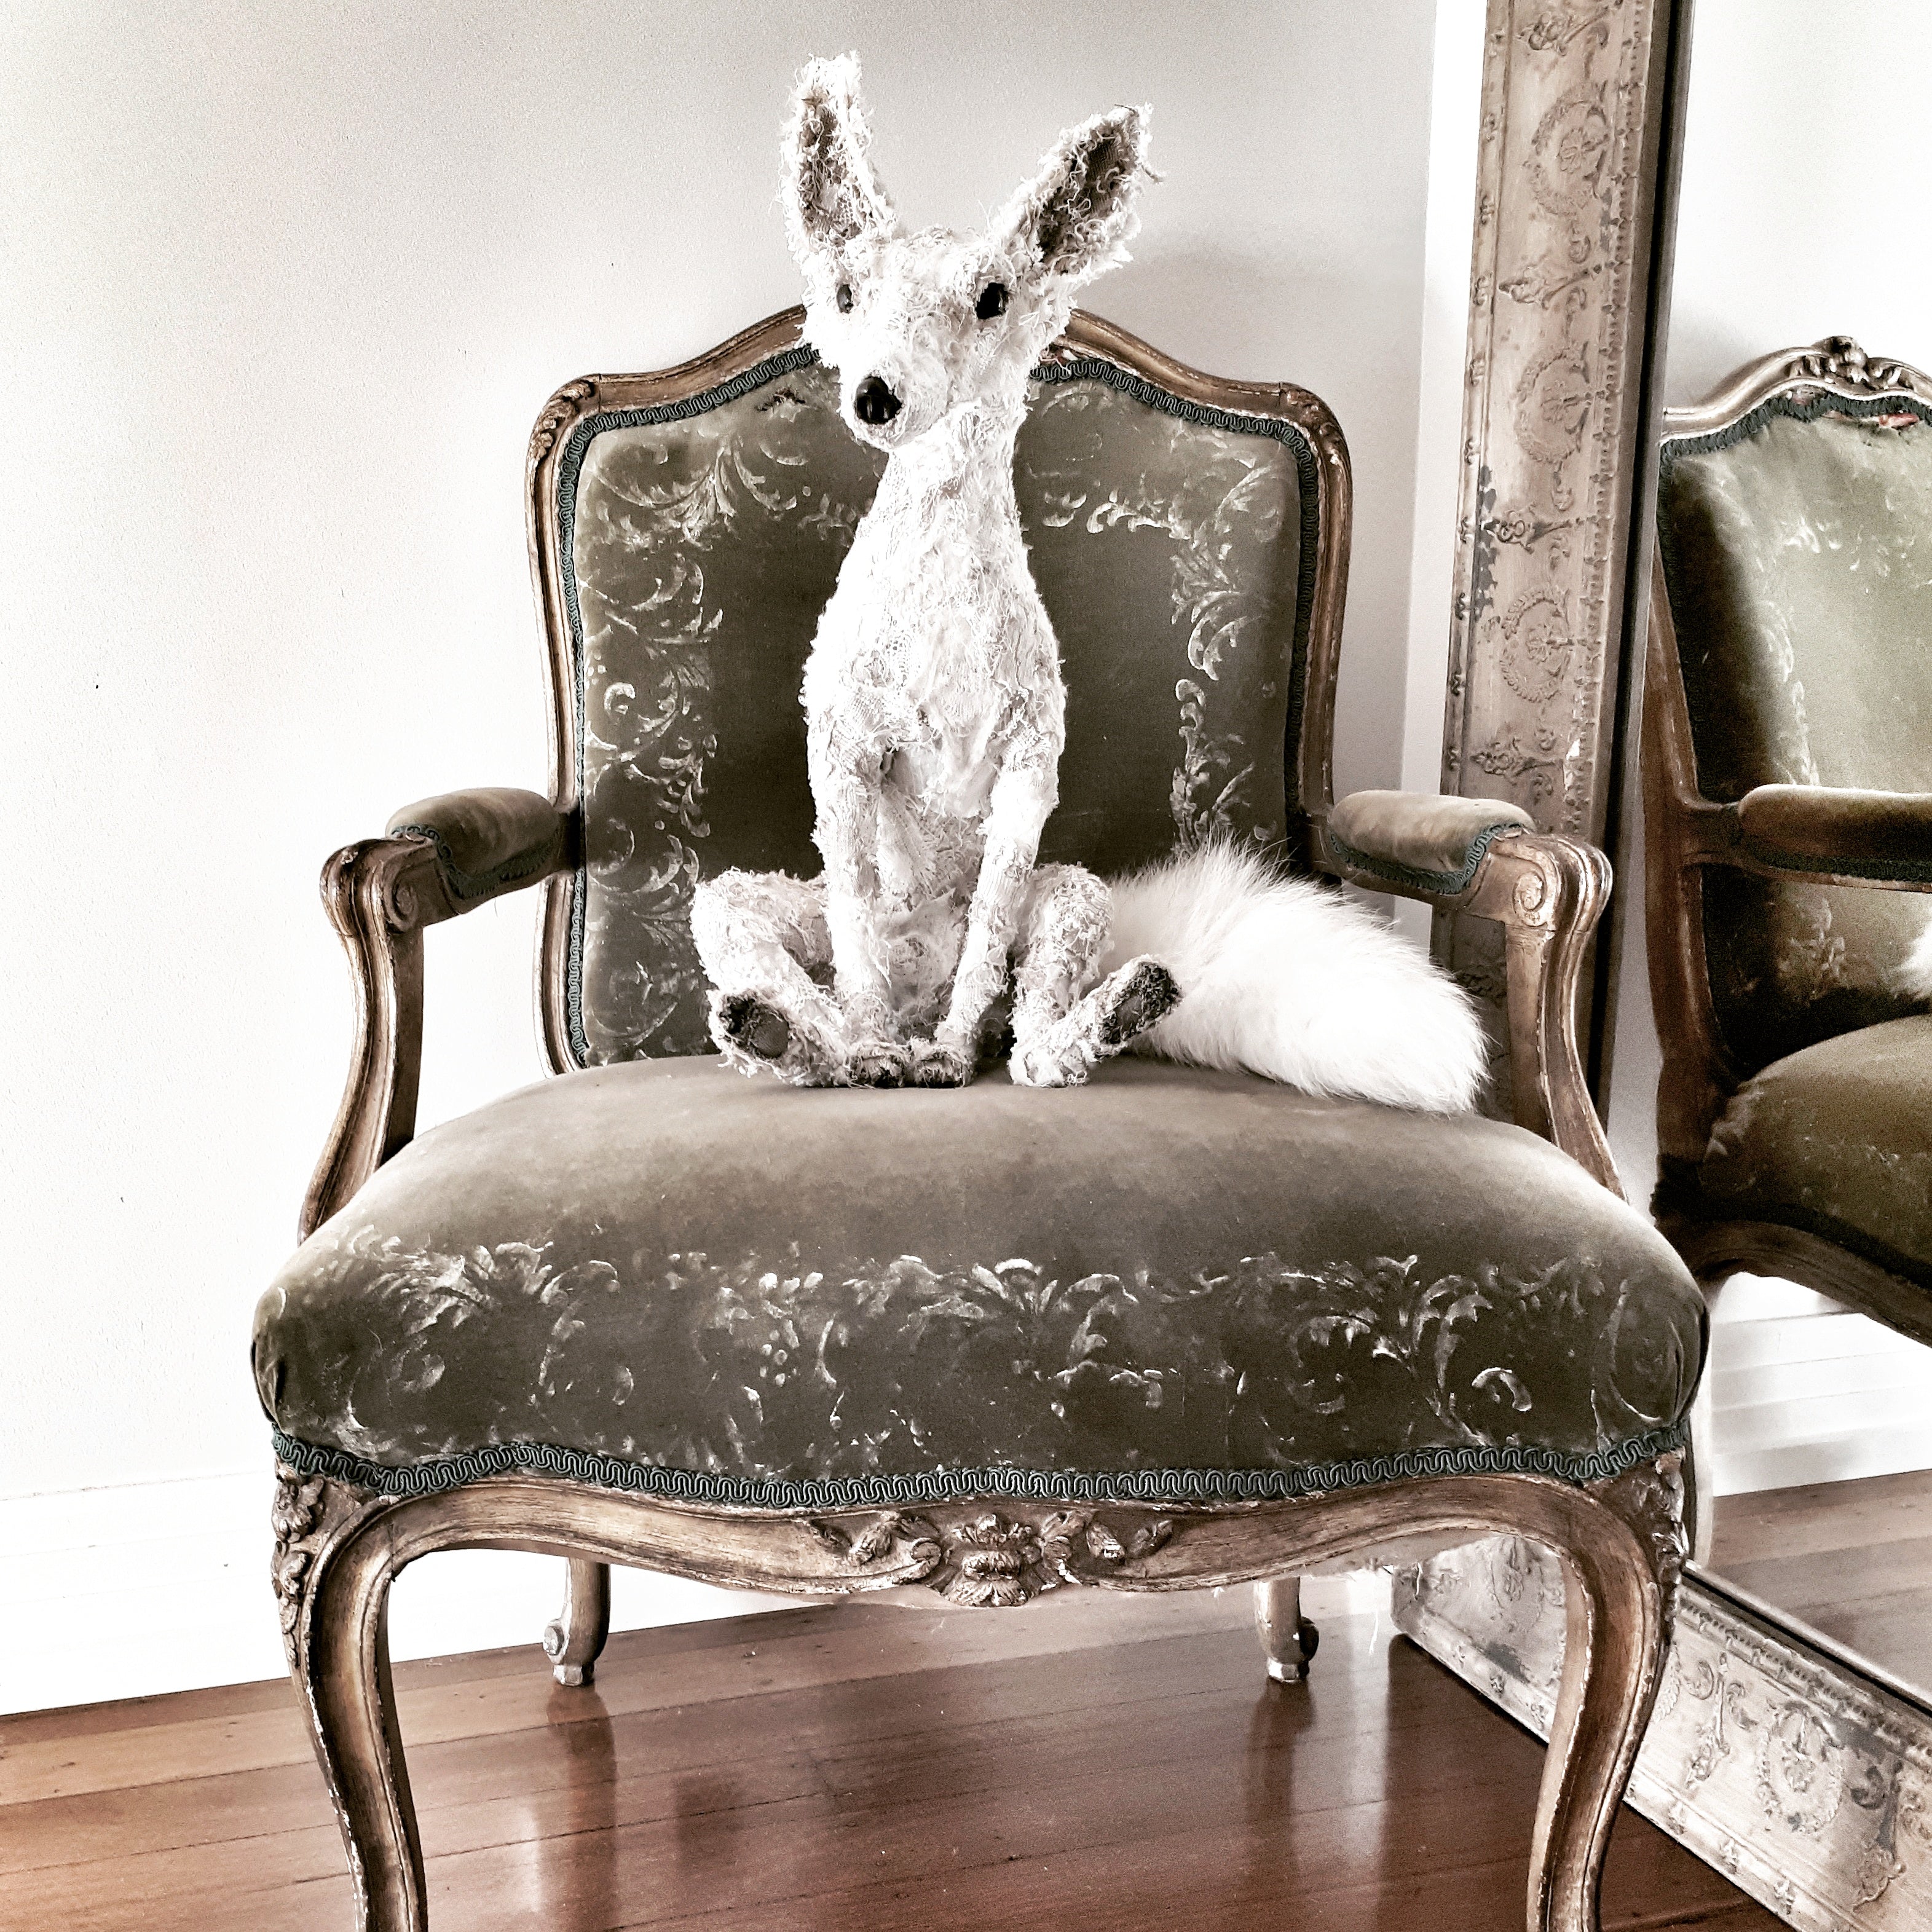 Fox textile sculpture created from vintage and antique textiles